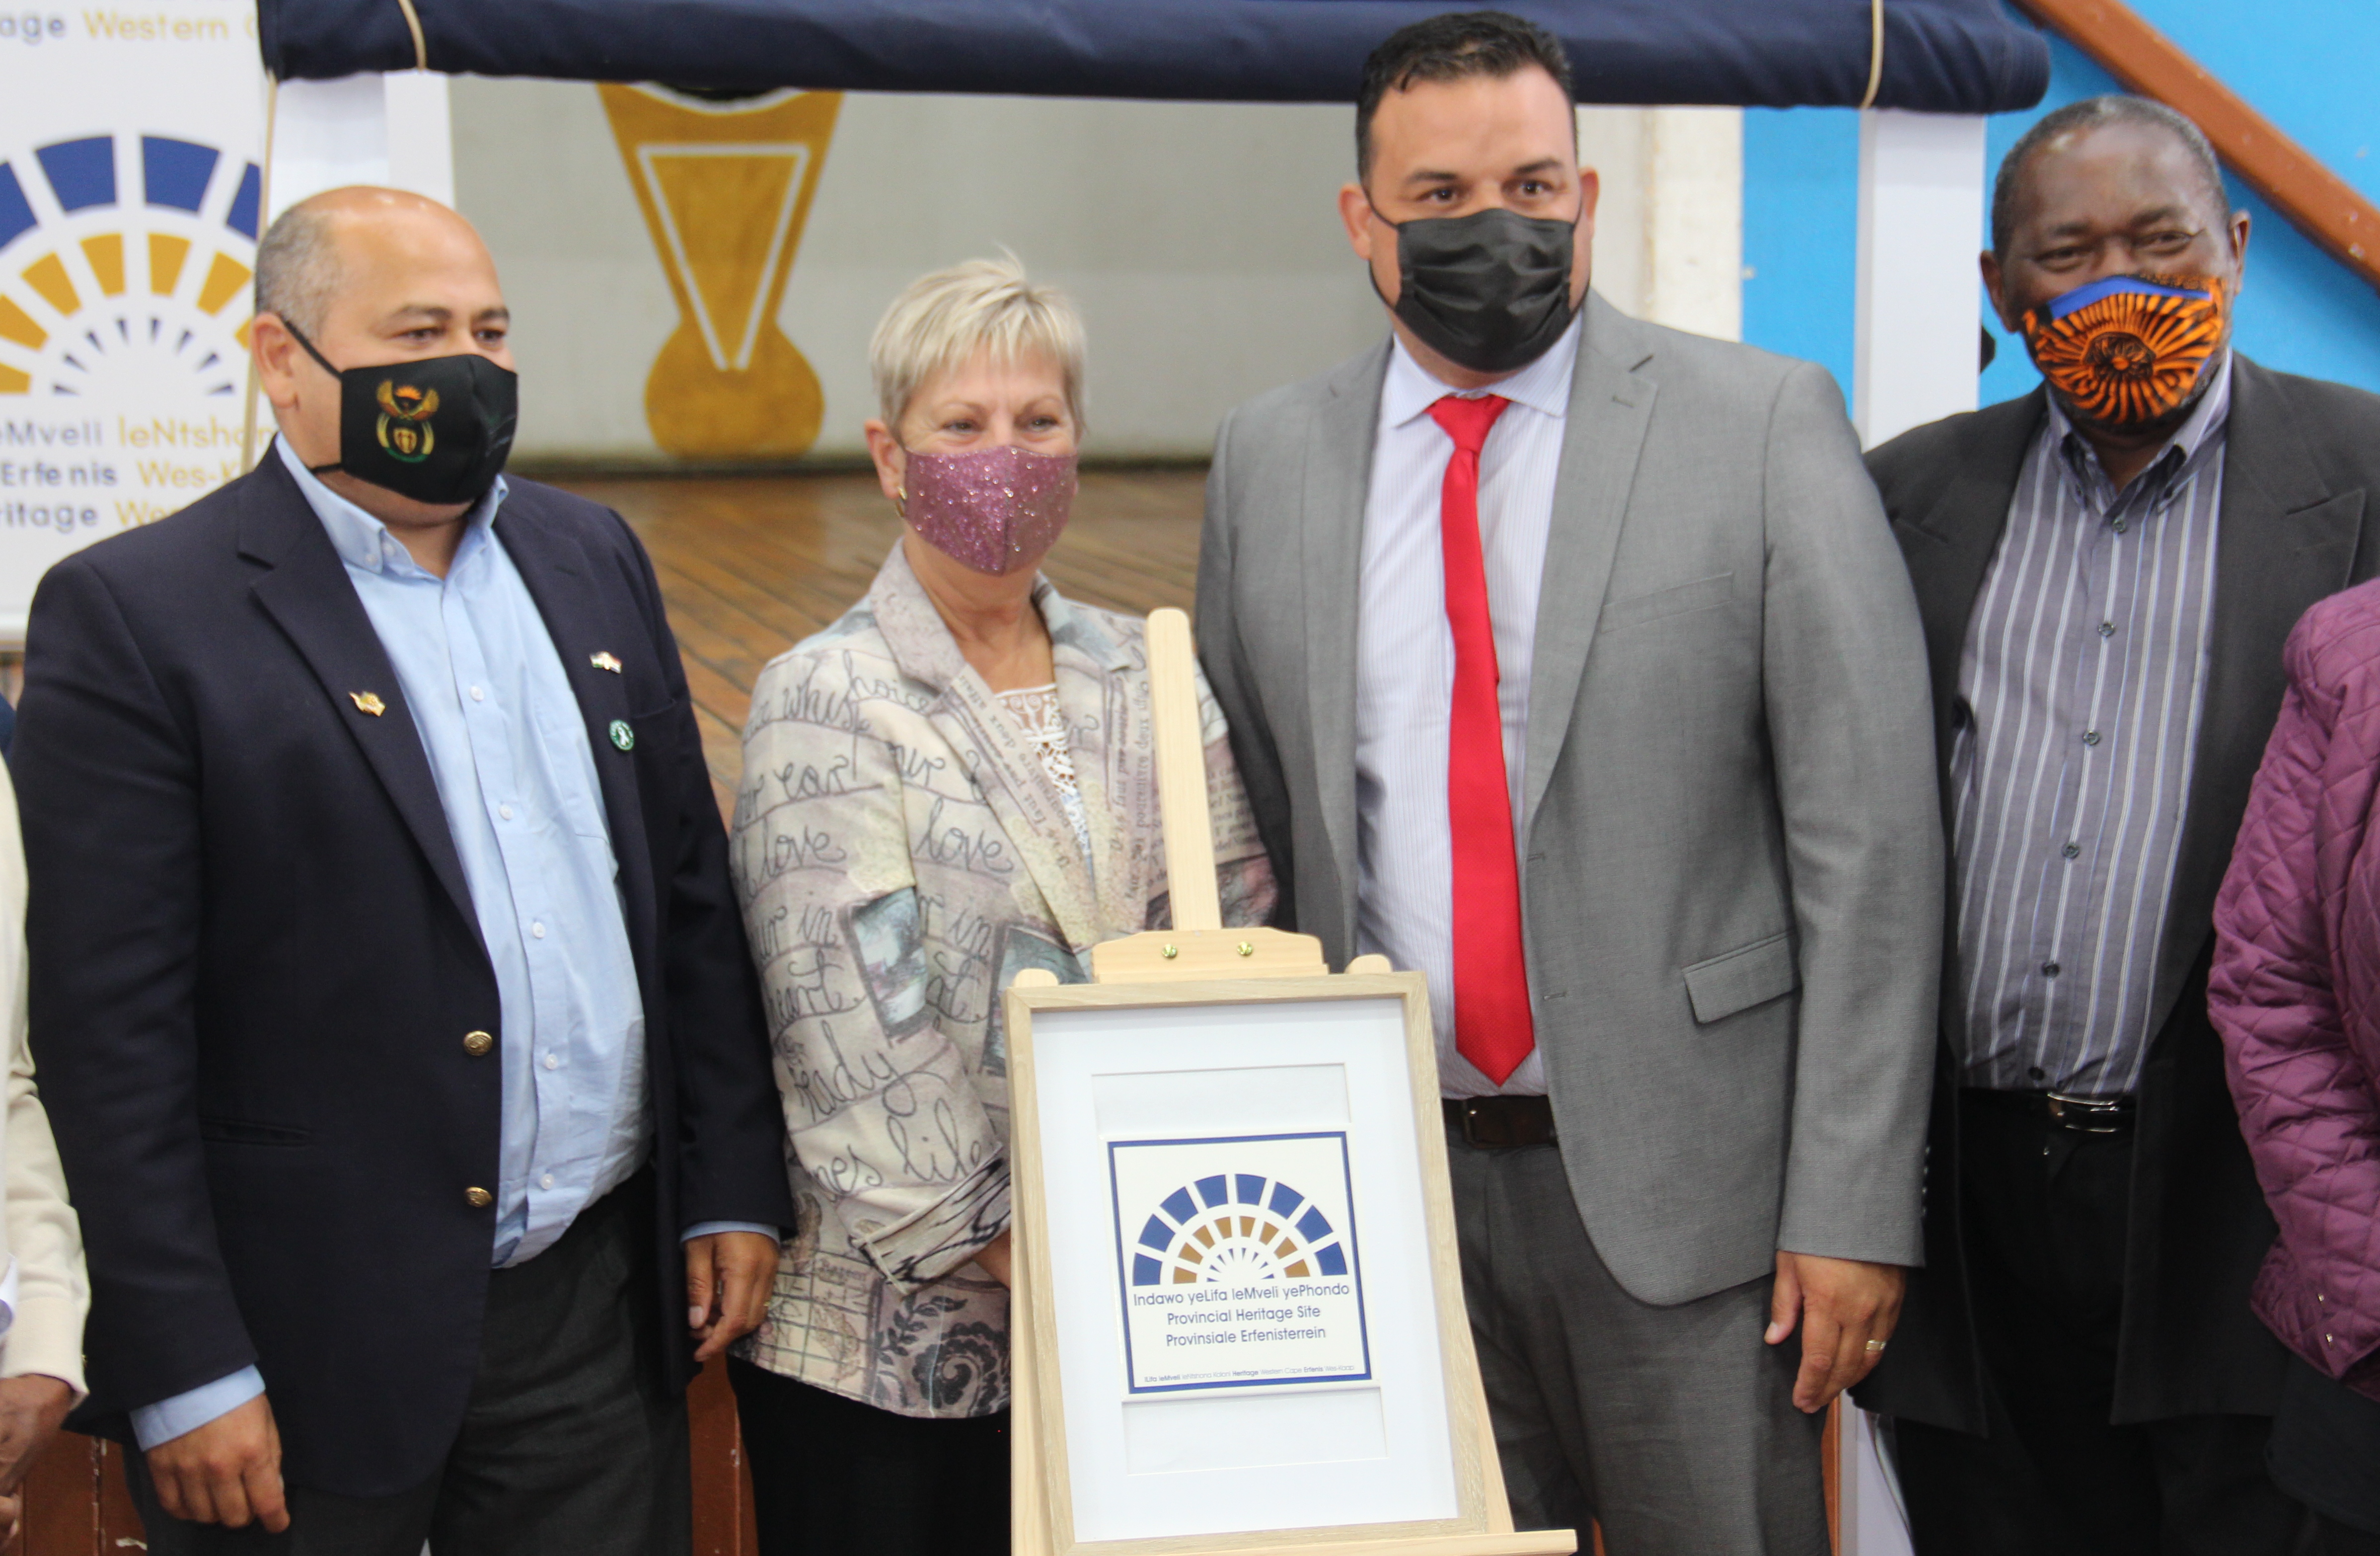 Member of Parliament, Faiez Jacobs; Minister Anroux Marais; Cape Town councillor, Angus Mckenzie; and Advocate Mandla Mdludlu of the Heritage WC council (L-R) unveil the new plaque.